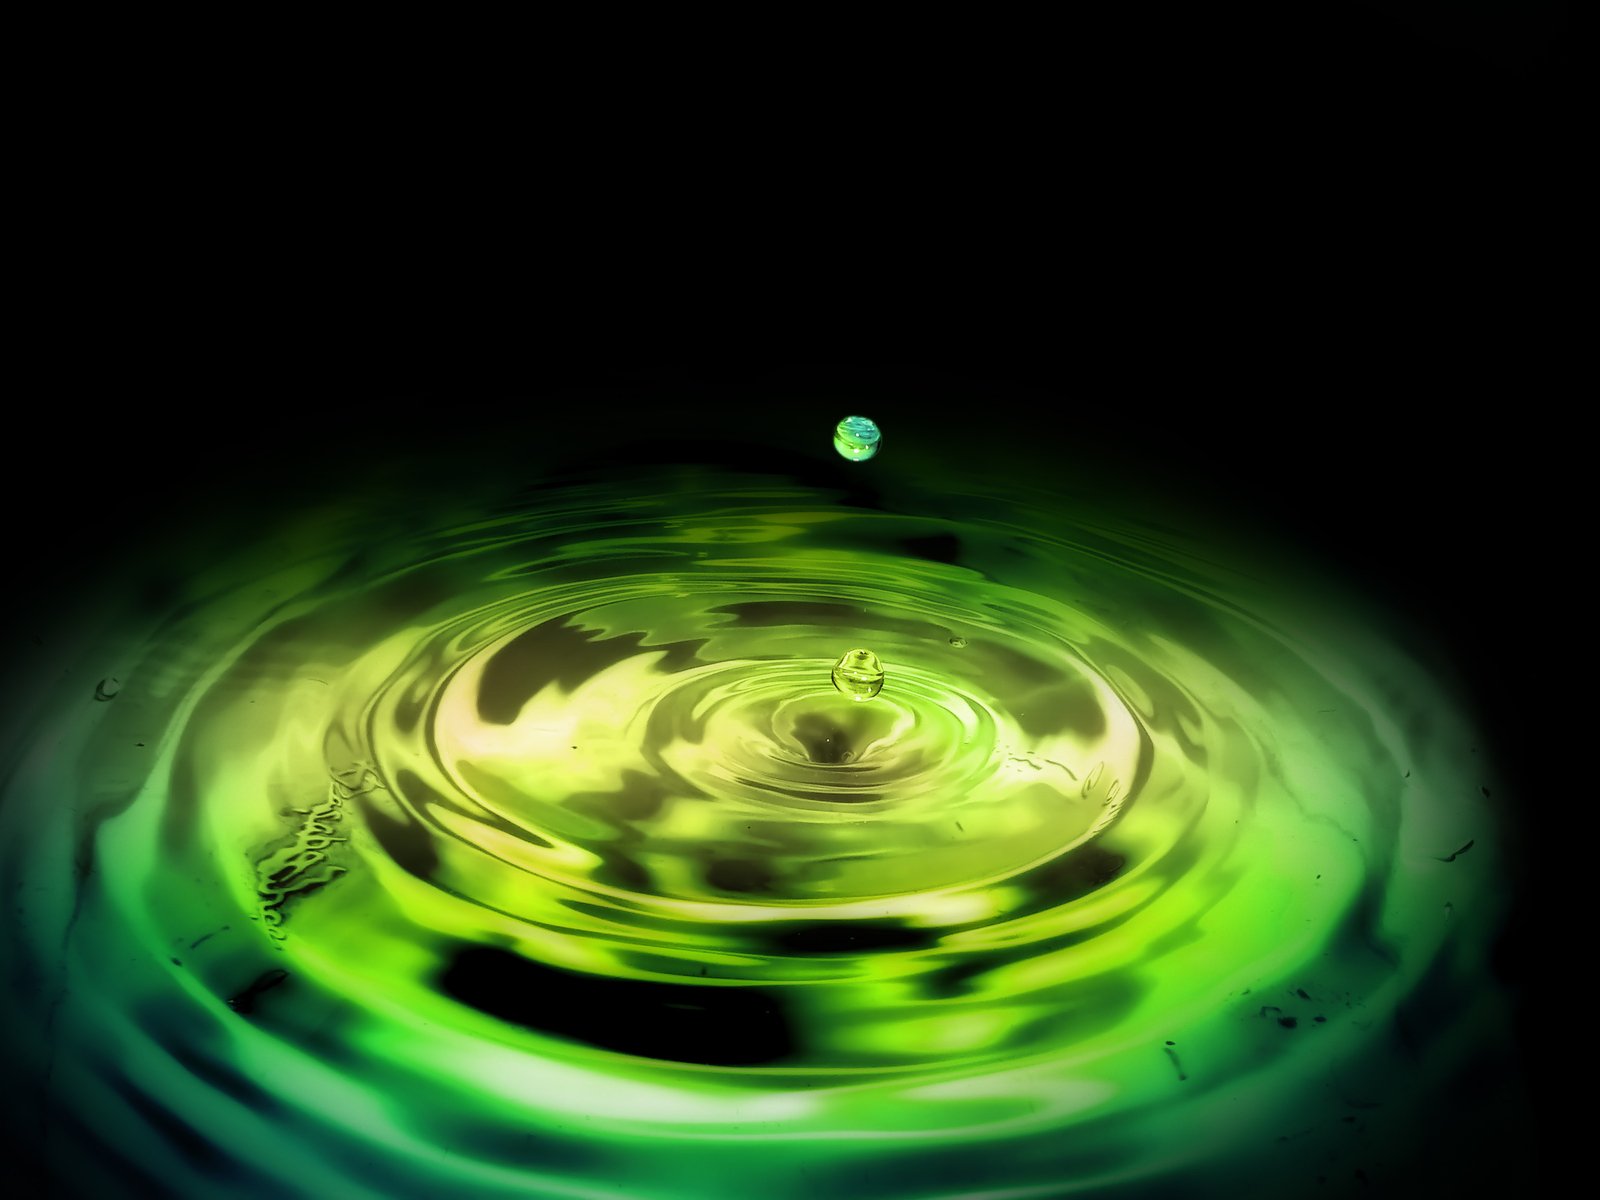 an abstract green circular painting in water